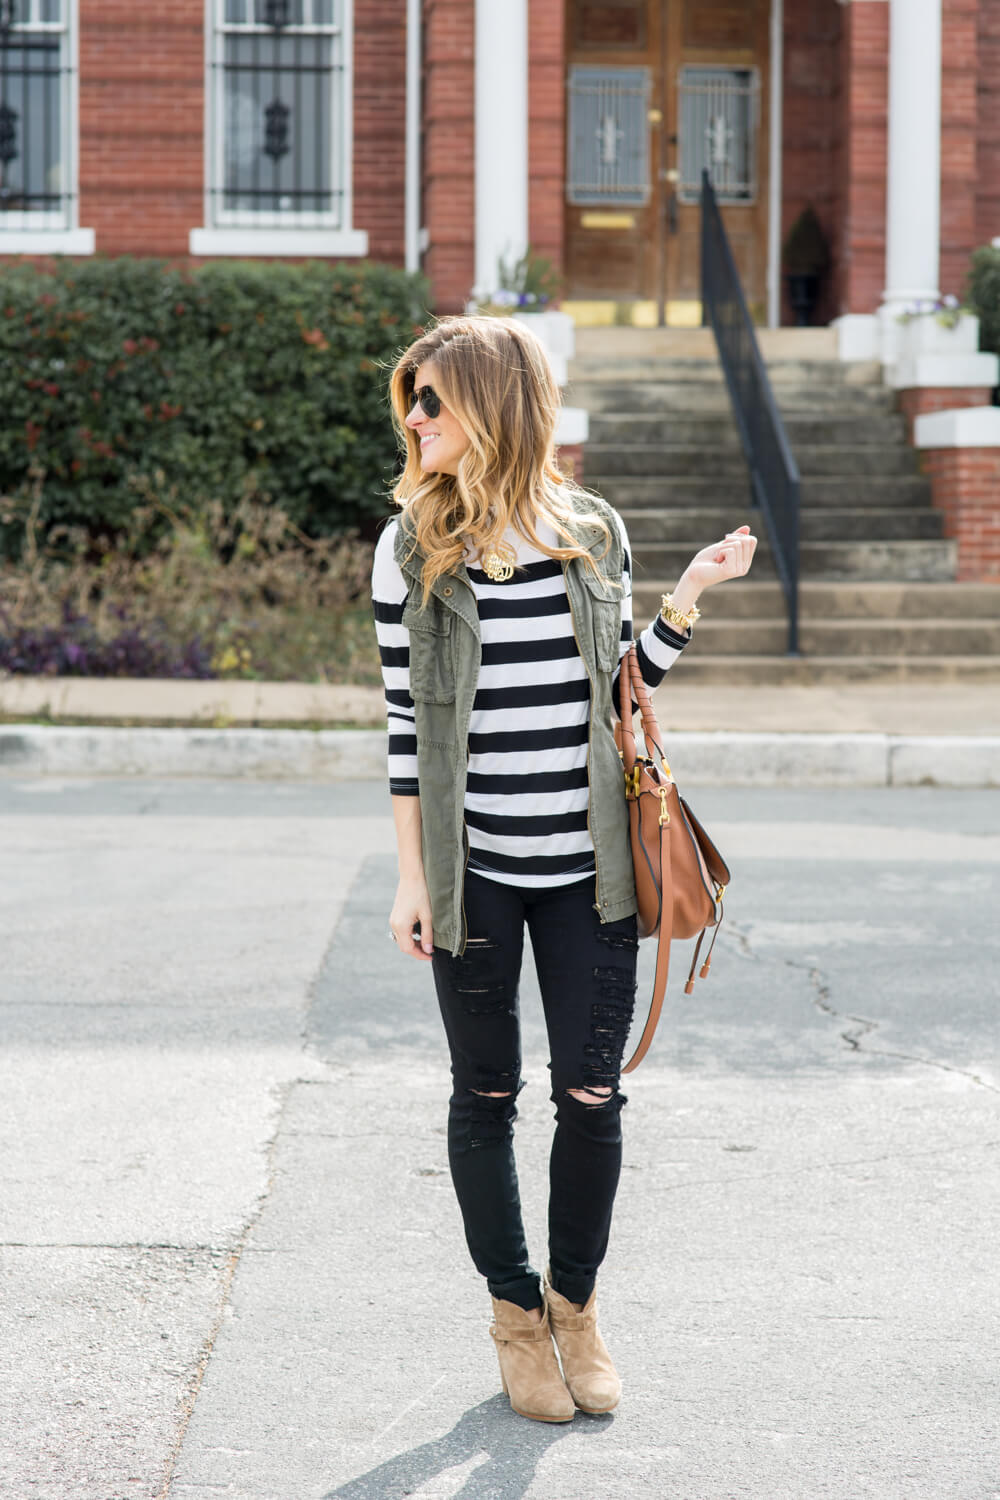 What to wear with black jeans - 30+ 